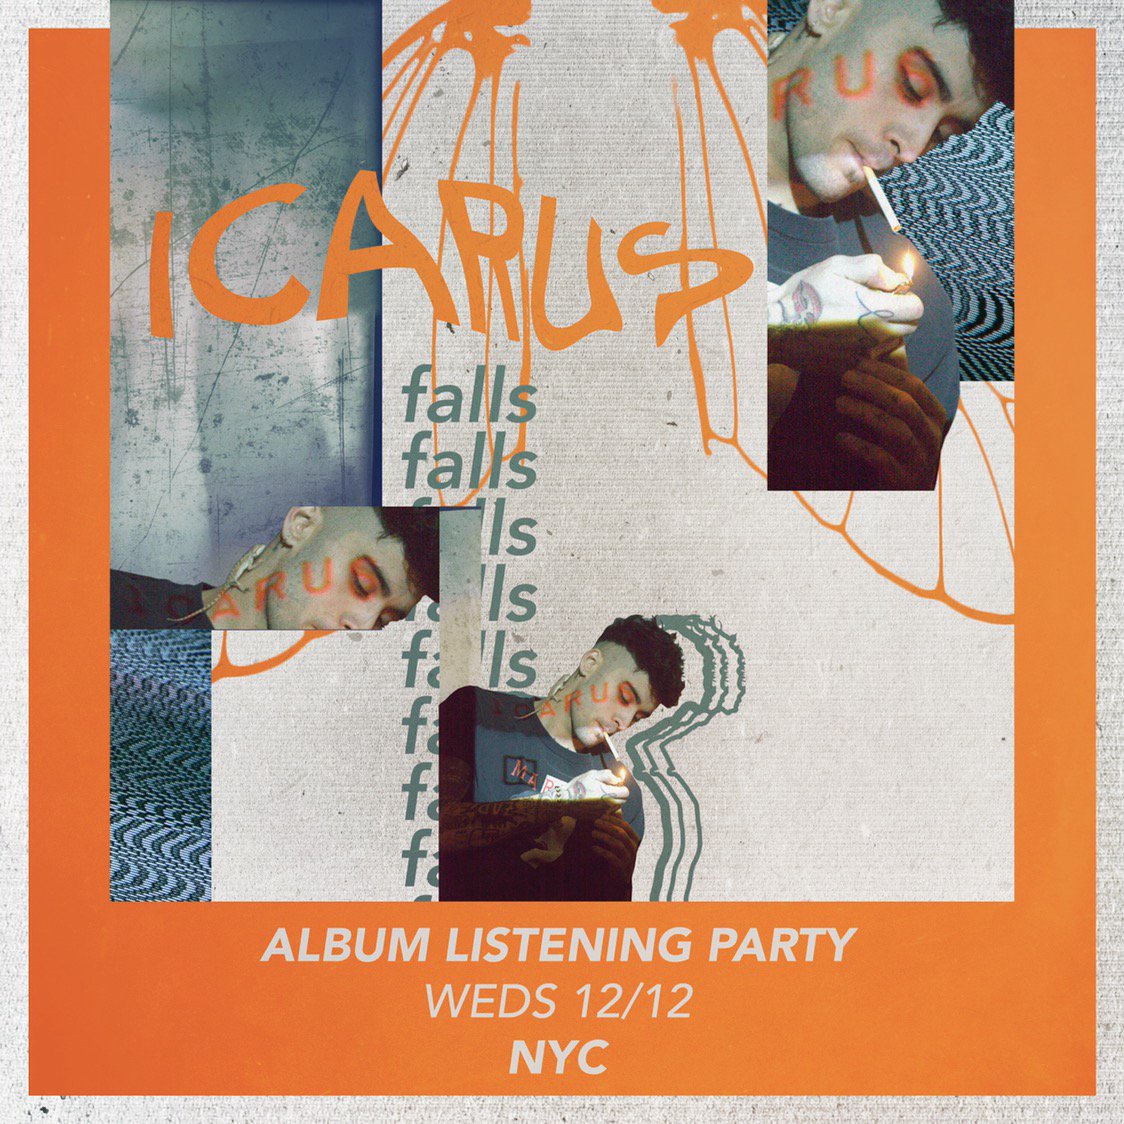 NYC album listening party this Wednesday:  
Limited tickets available #ICARUSFALLS 💿 🎧 